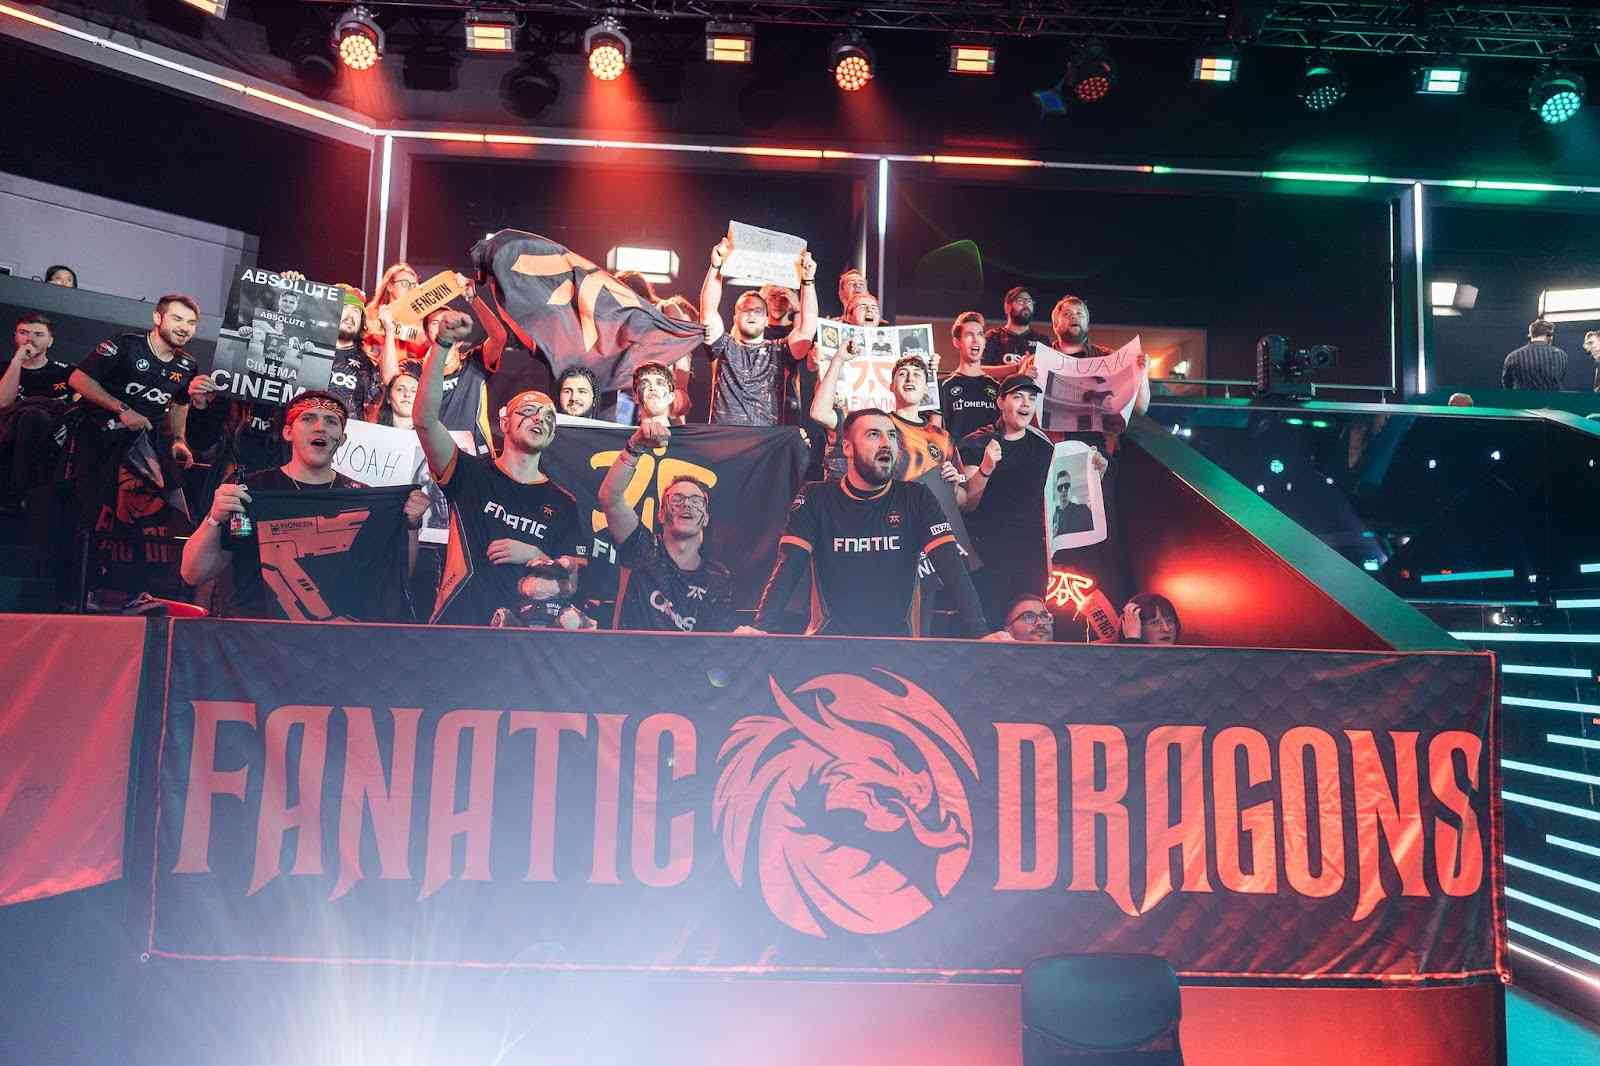 Fnatic fans take the stage by storm whenever their team is on. Image by Wojciech Wandzel/Riot Games